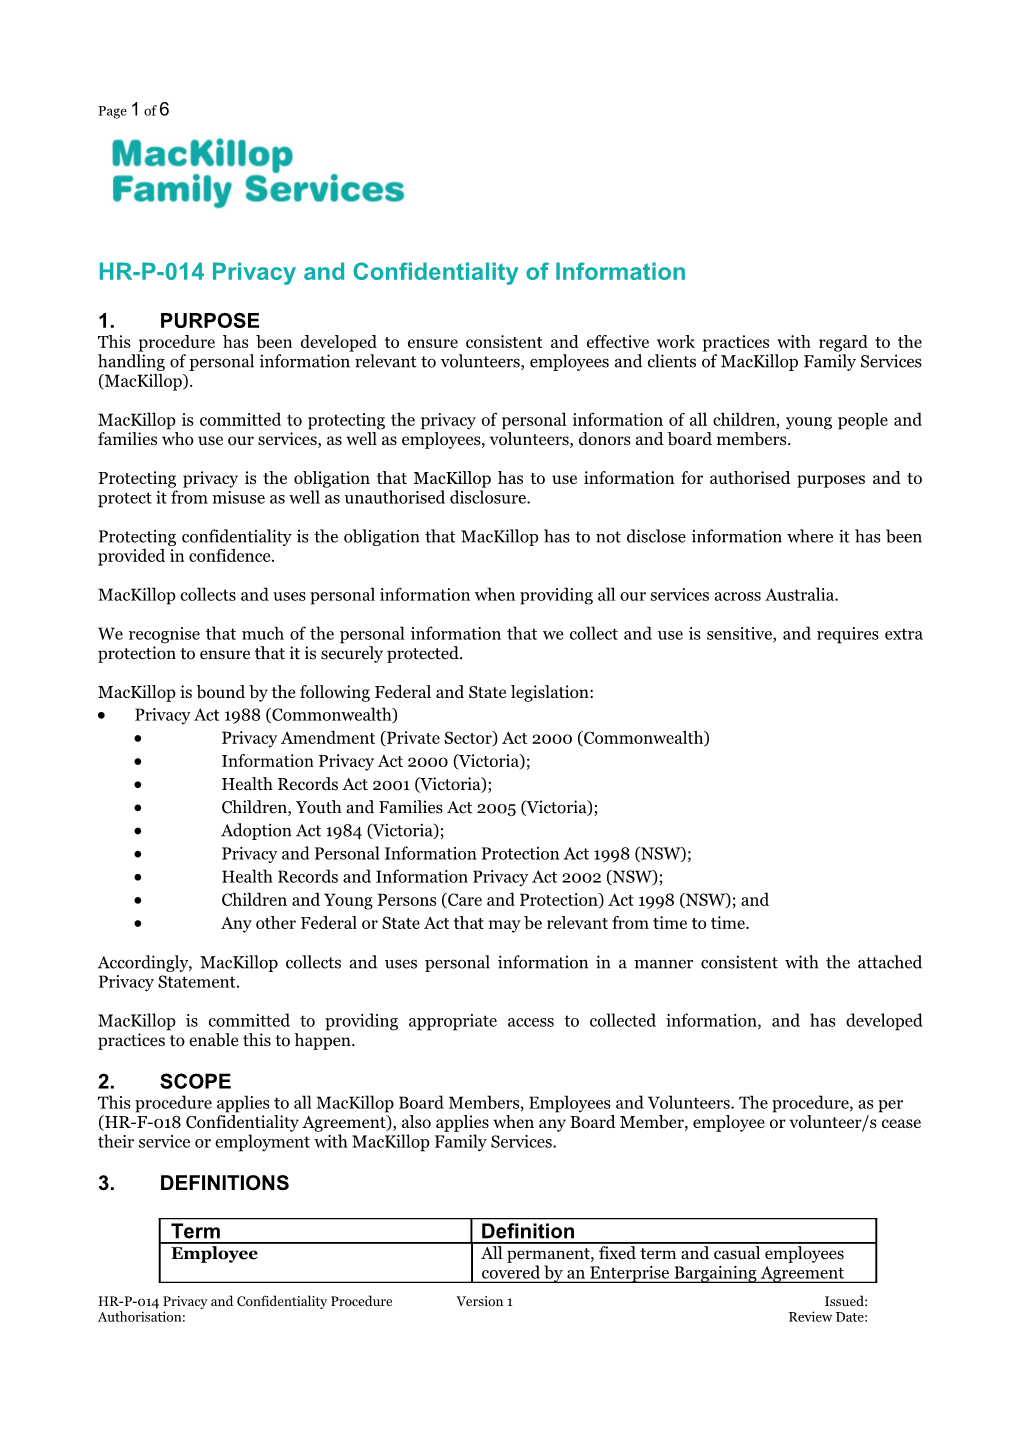 HR-P-014 Privacy and Confidentiality